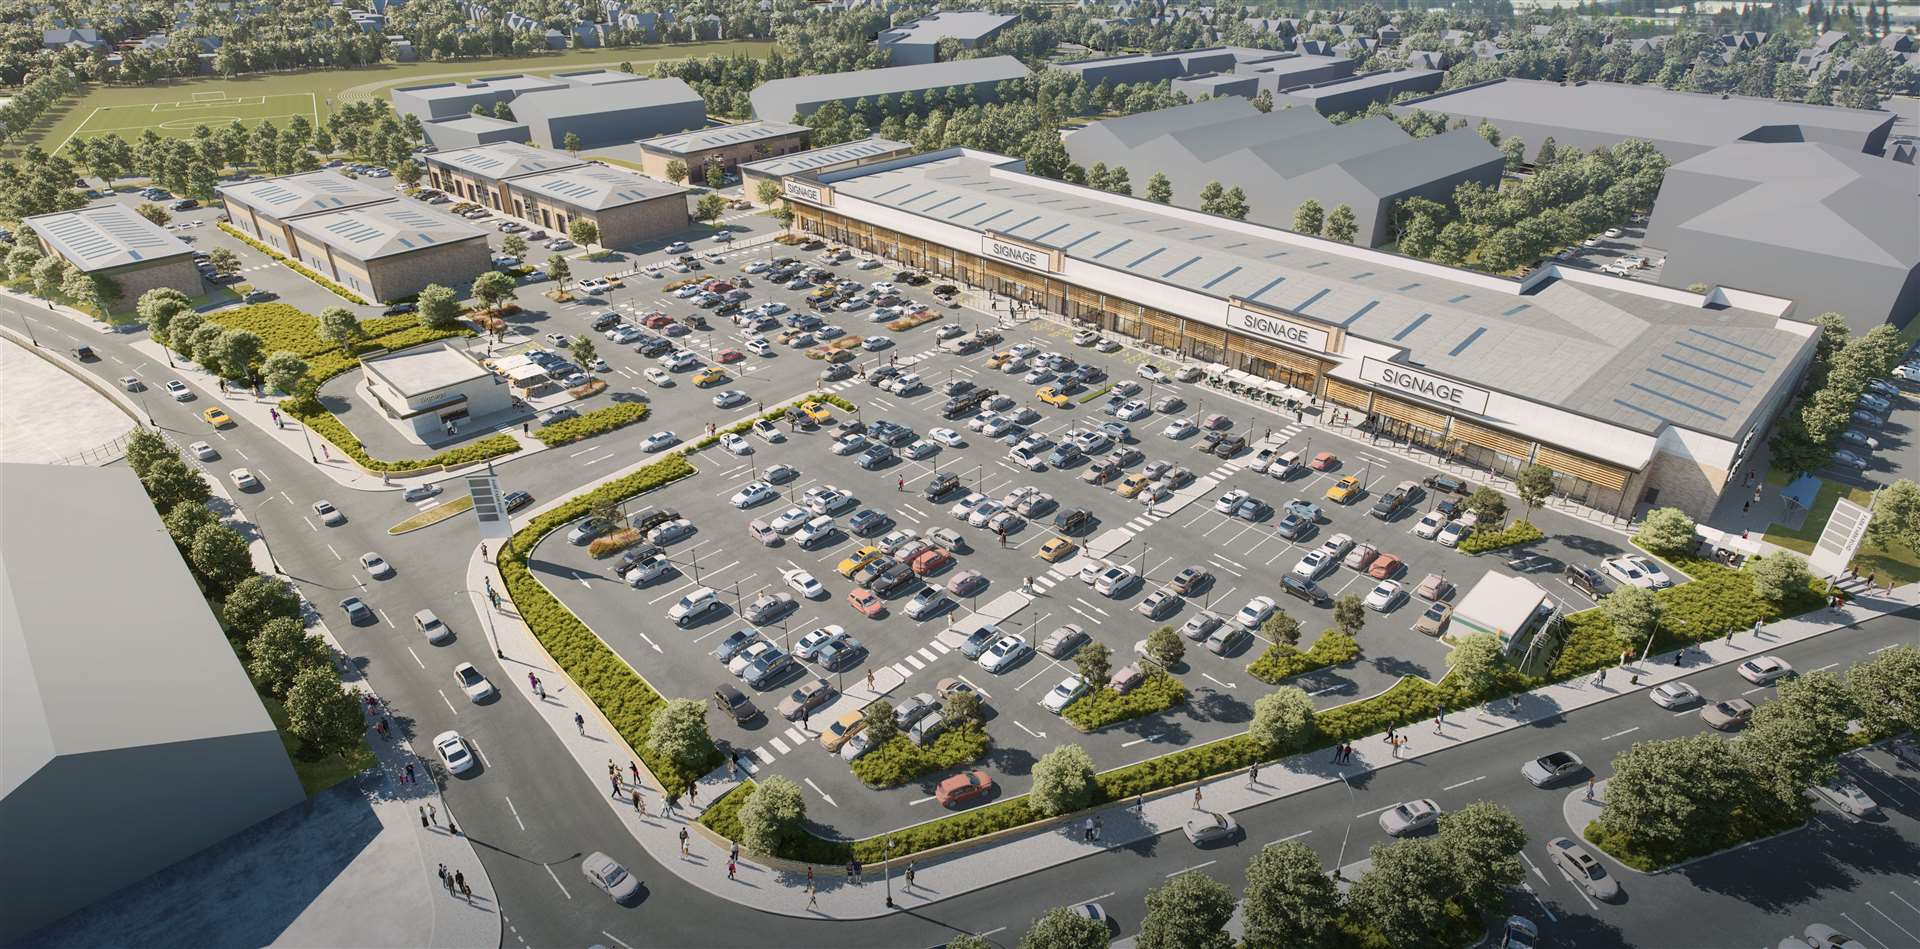 The new retail development could feature a drive-thru restaurant. Picture: Corstorphine & Wright